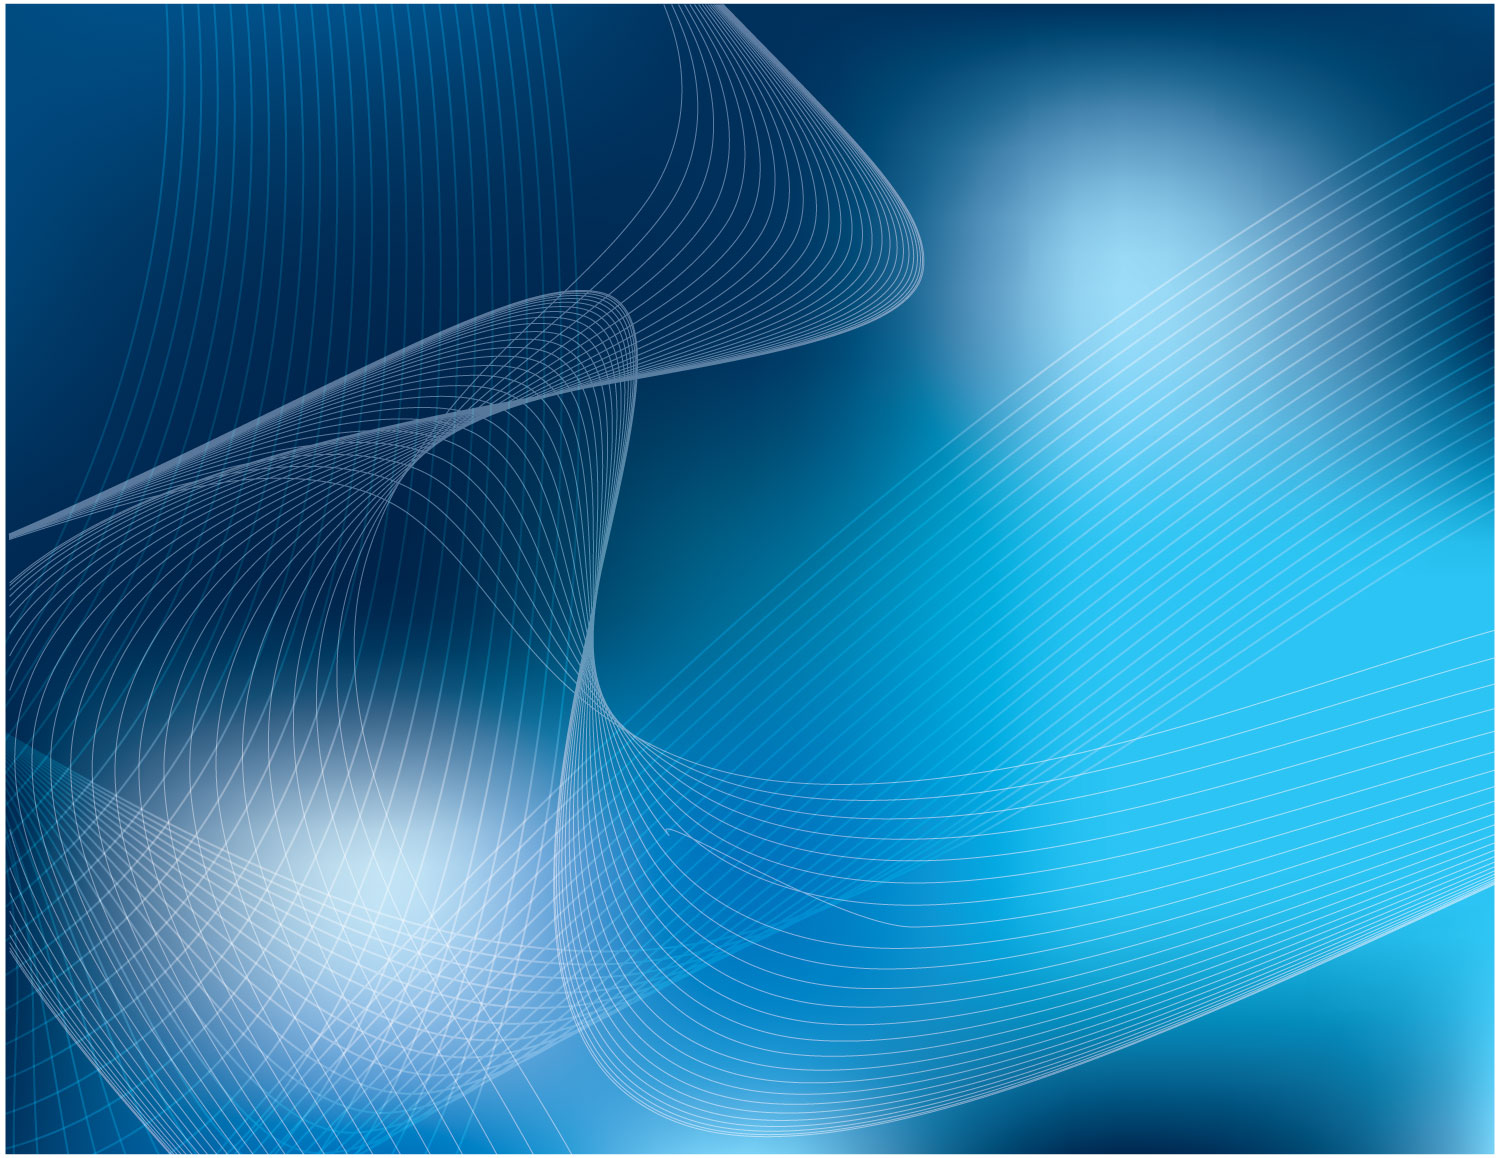 Fuzzy Blue Tones With Abstract Shapes In Blue Background Powerpoint